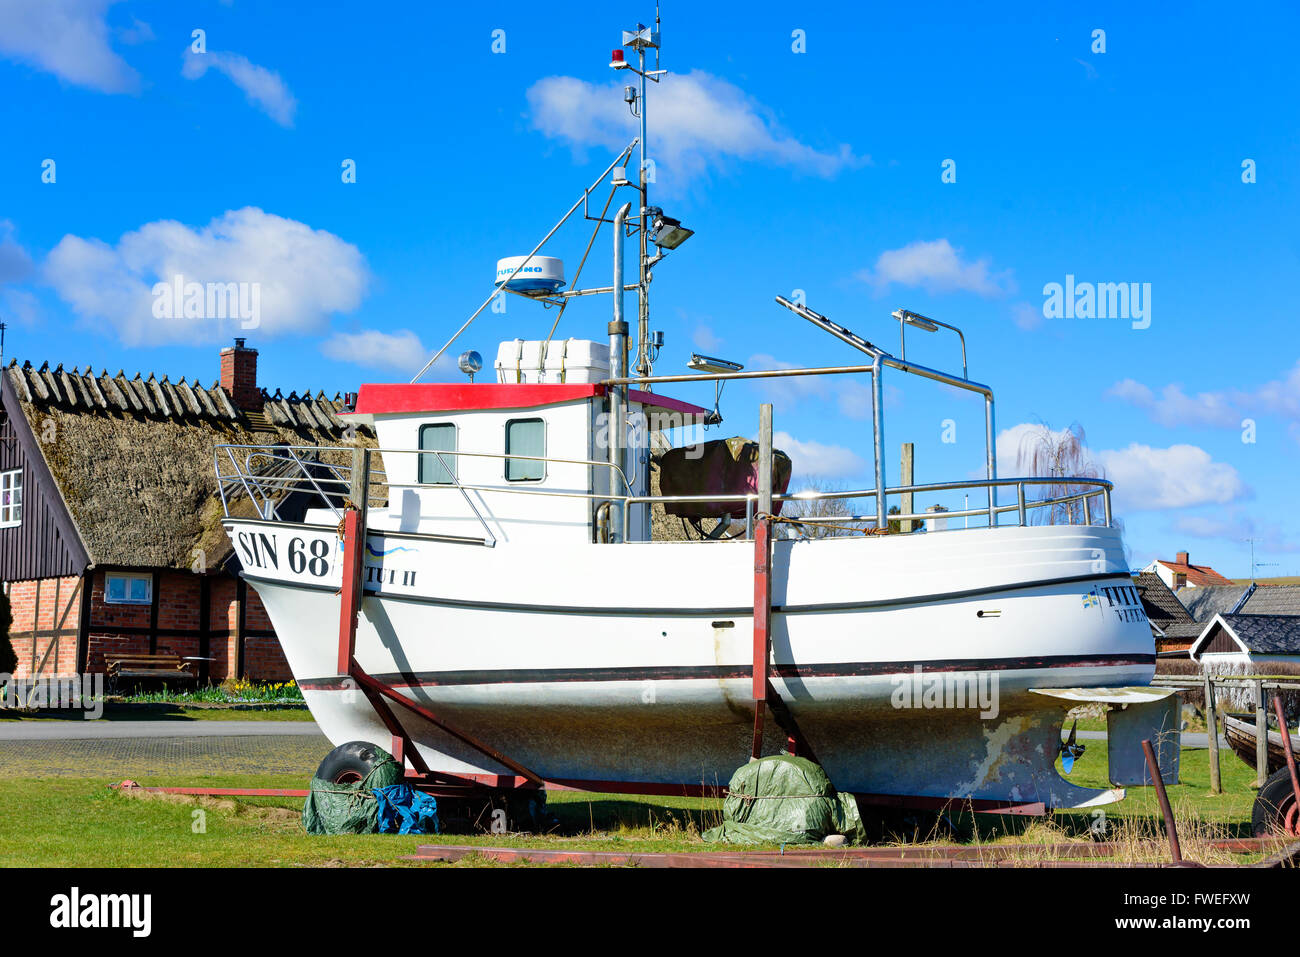 Kivik, Sweden - April 1, 2016: White fishing boat on trailer in a fishing community. House and cloudy sky in background. Stock Photo